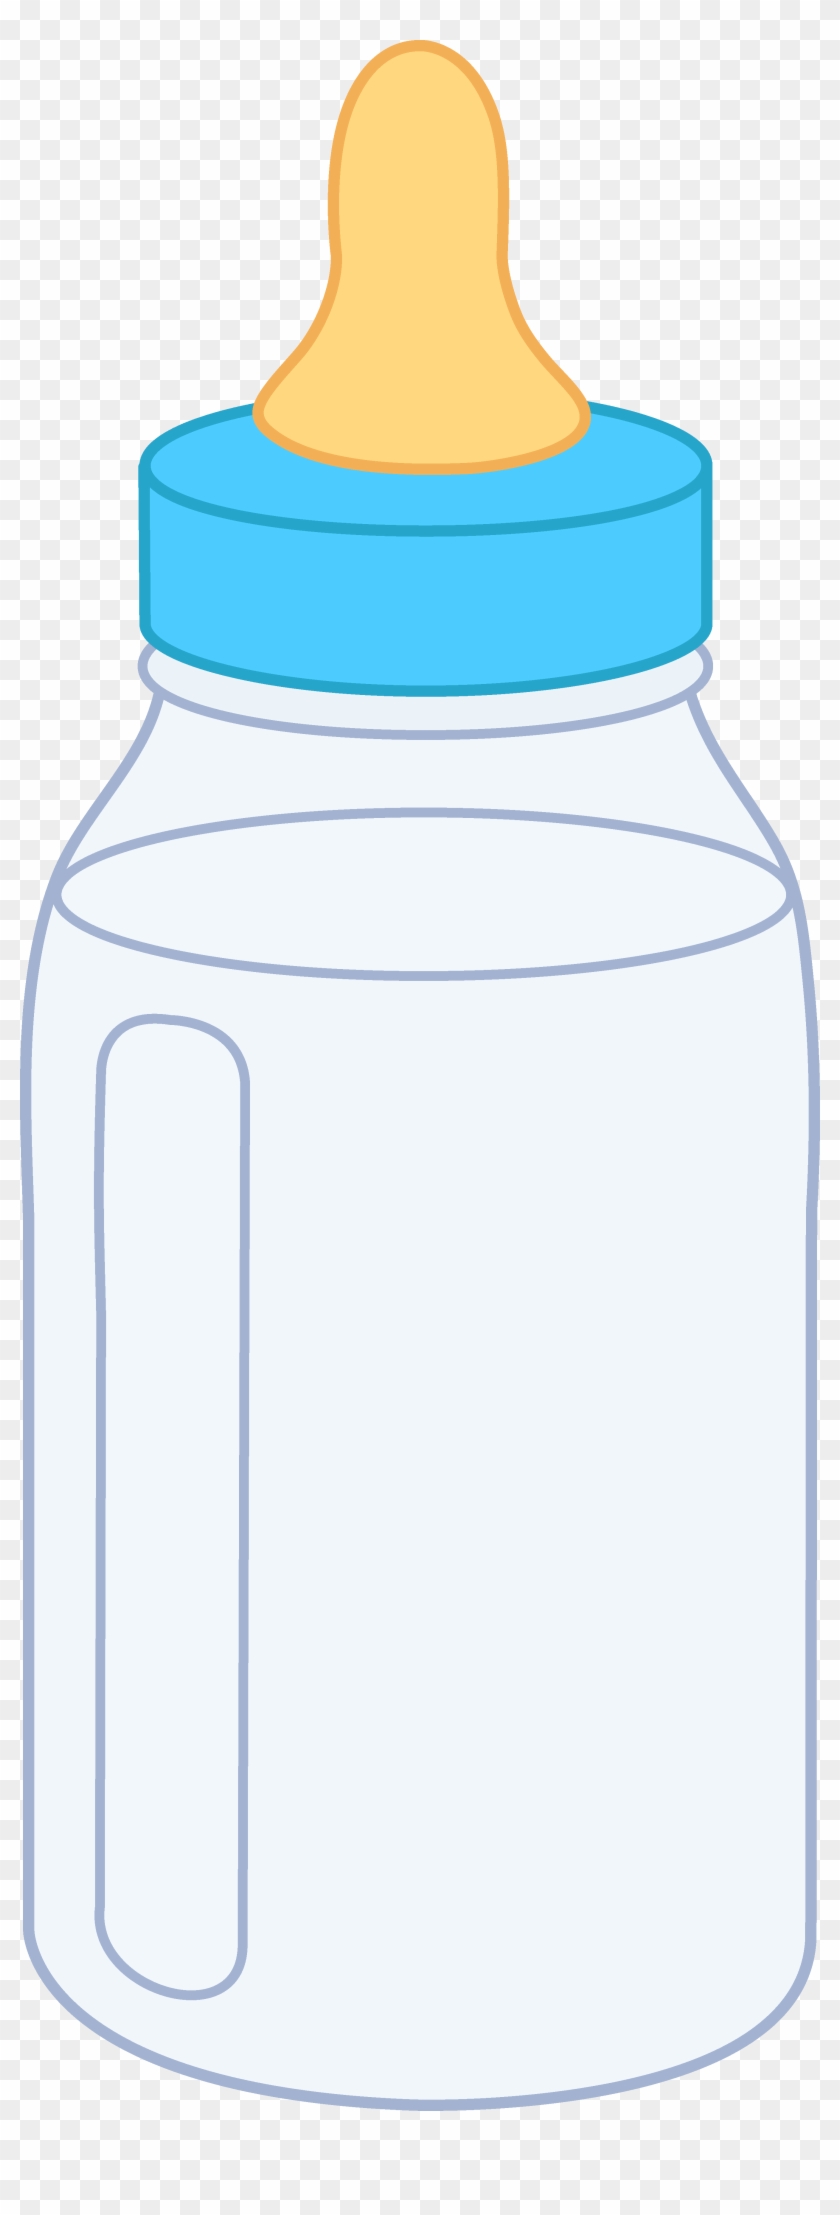 Blue Baby Bottle Clipart - Baby Bottle Graphic Transparent Background #498237